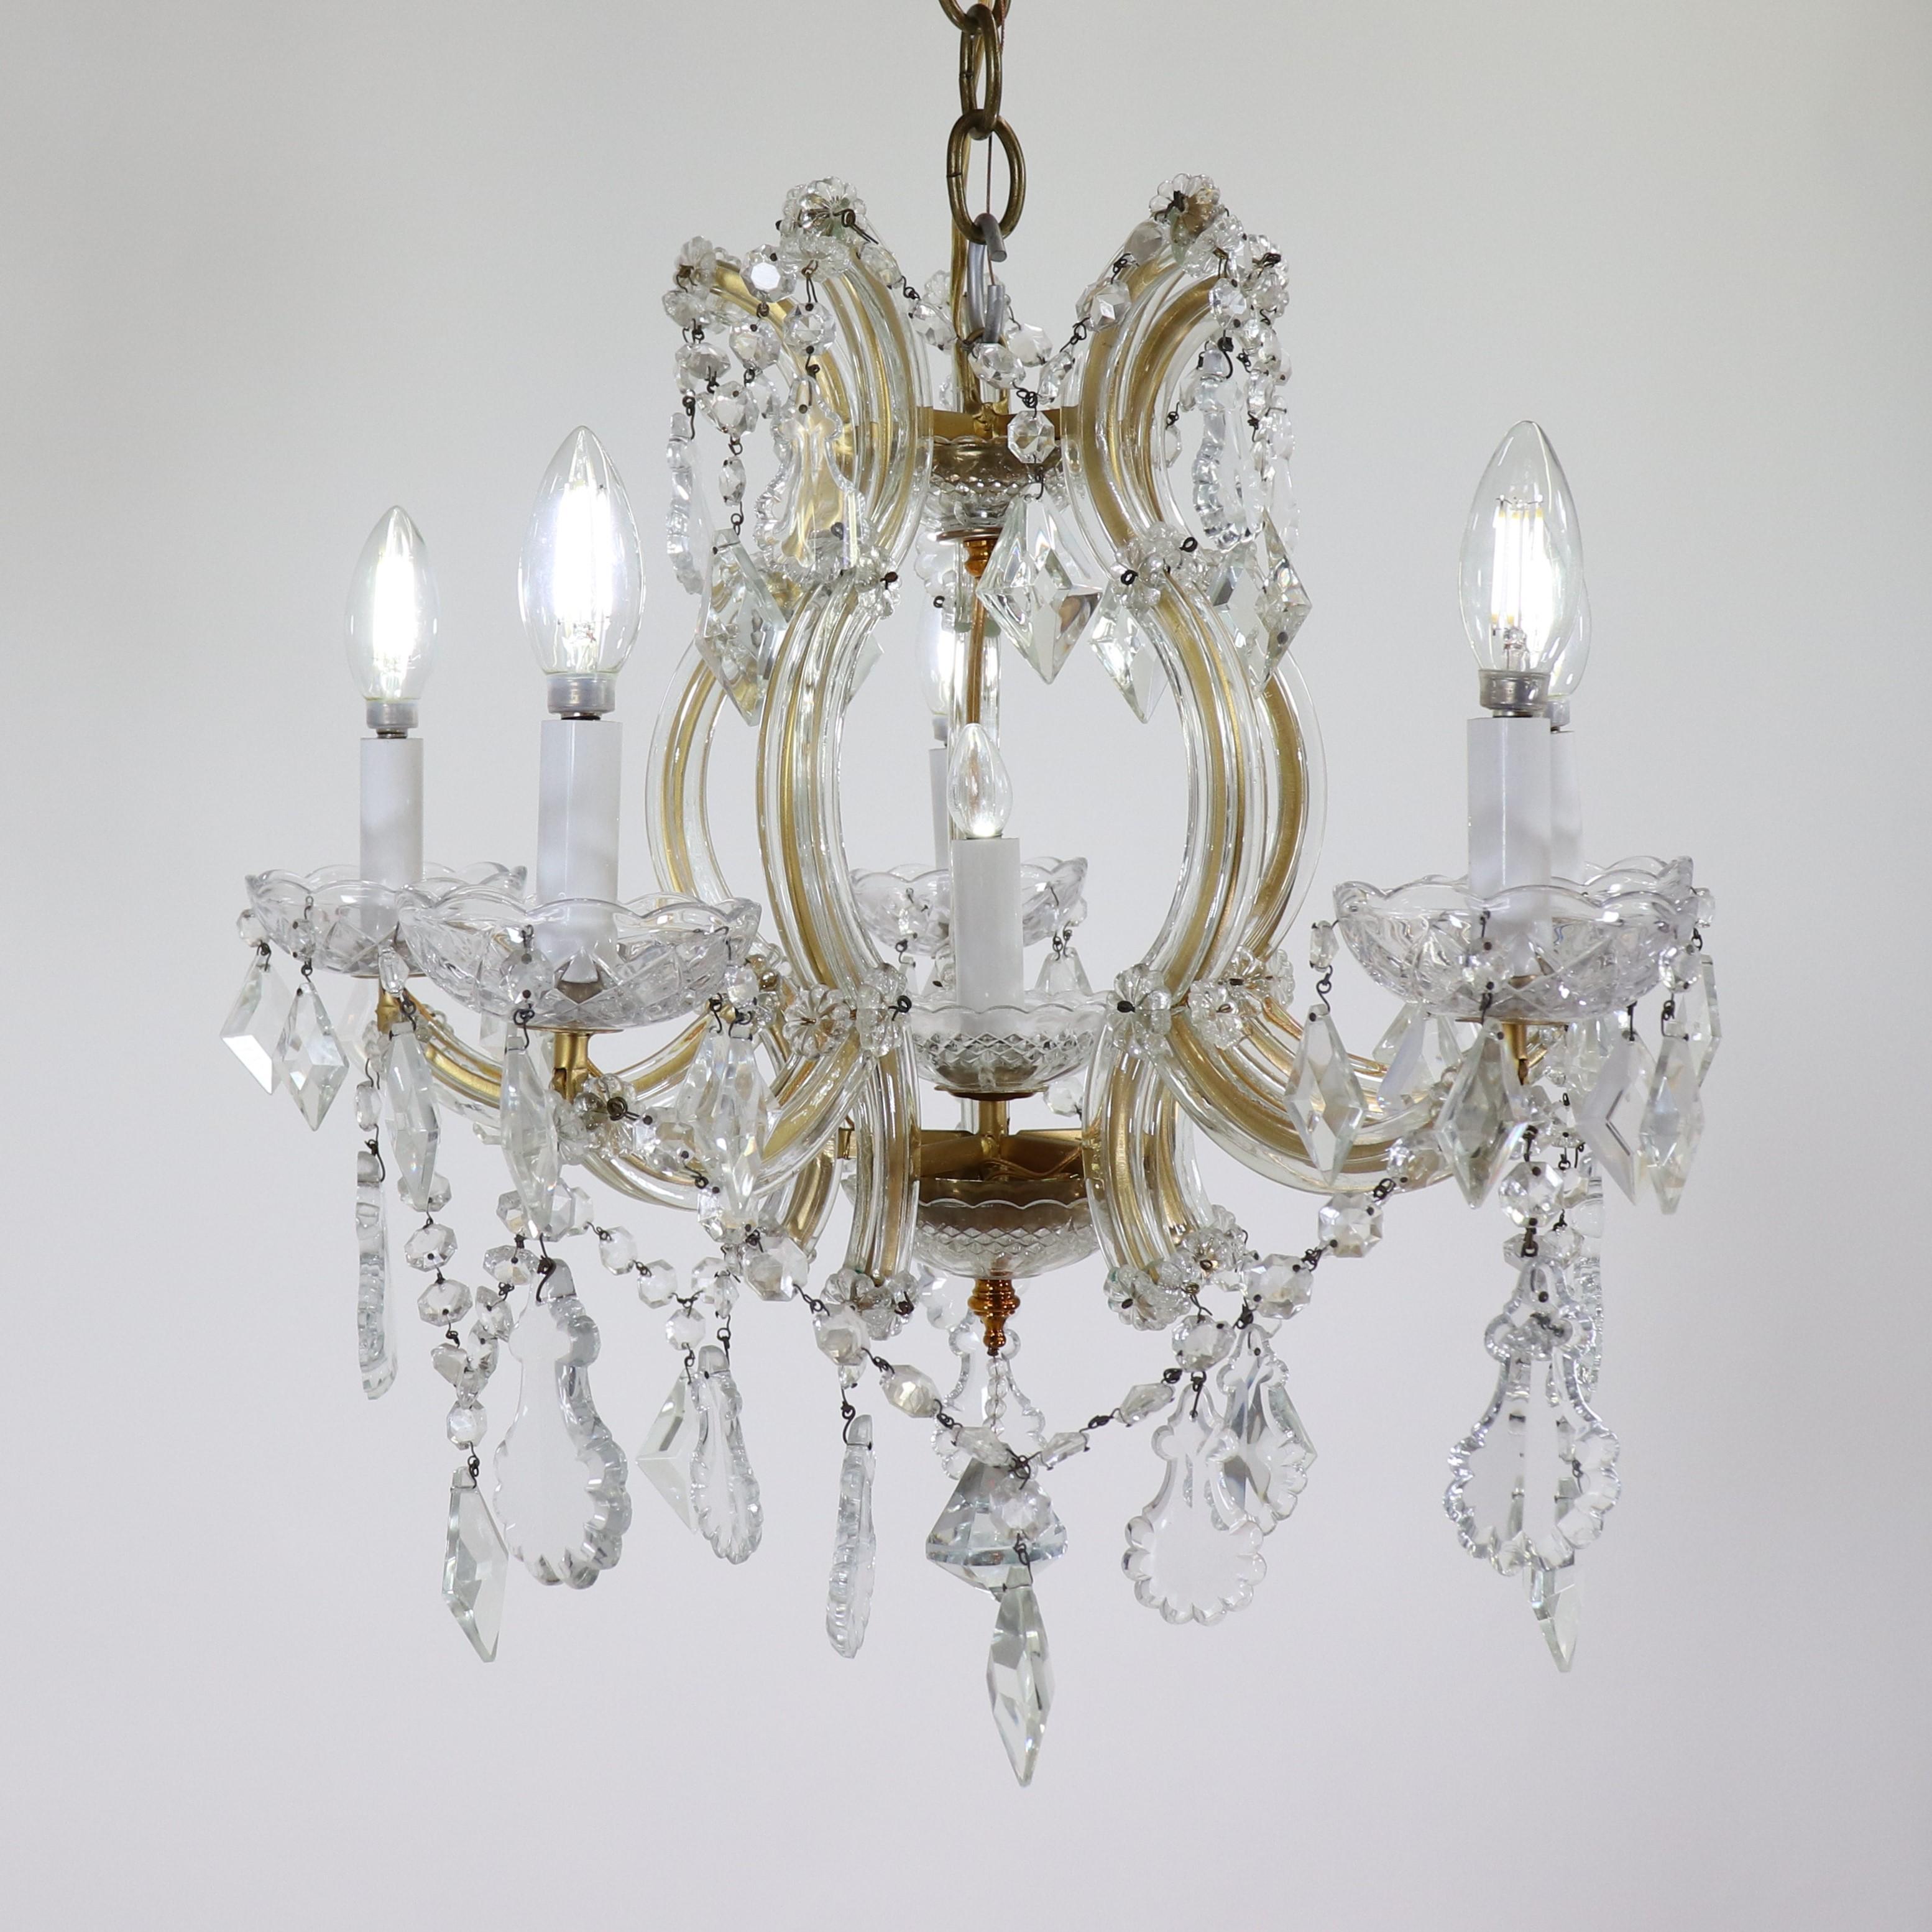 This type of chandelier is identified and named after the 18th century Empress of Austria, who in the late 18th Century had her palace filled with these Bohemian crystal chandeliers. This small-scale early twentieth-century Maria Theresa-style